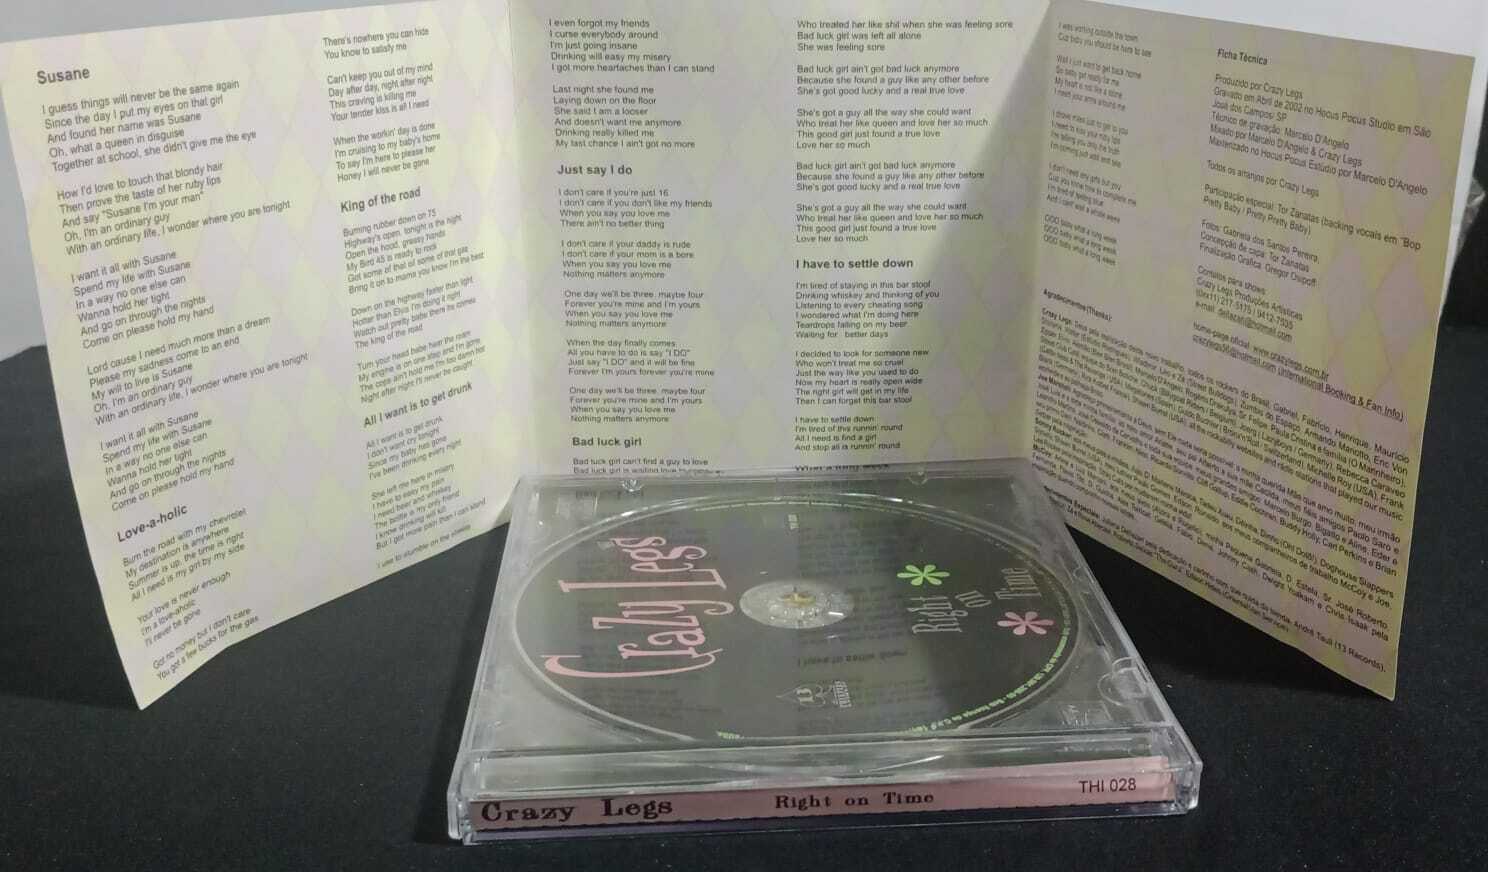 CD - Crazy Legs - Right On Time